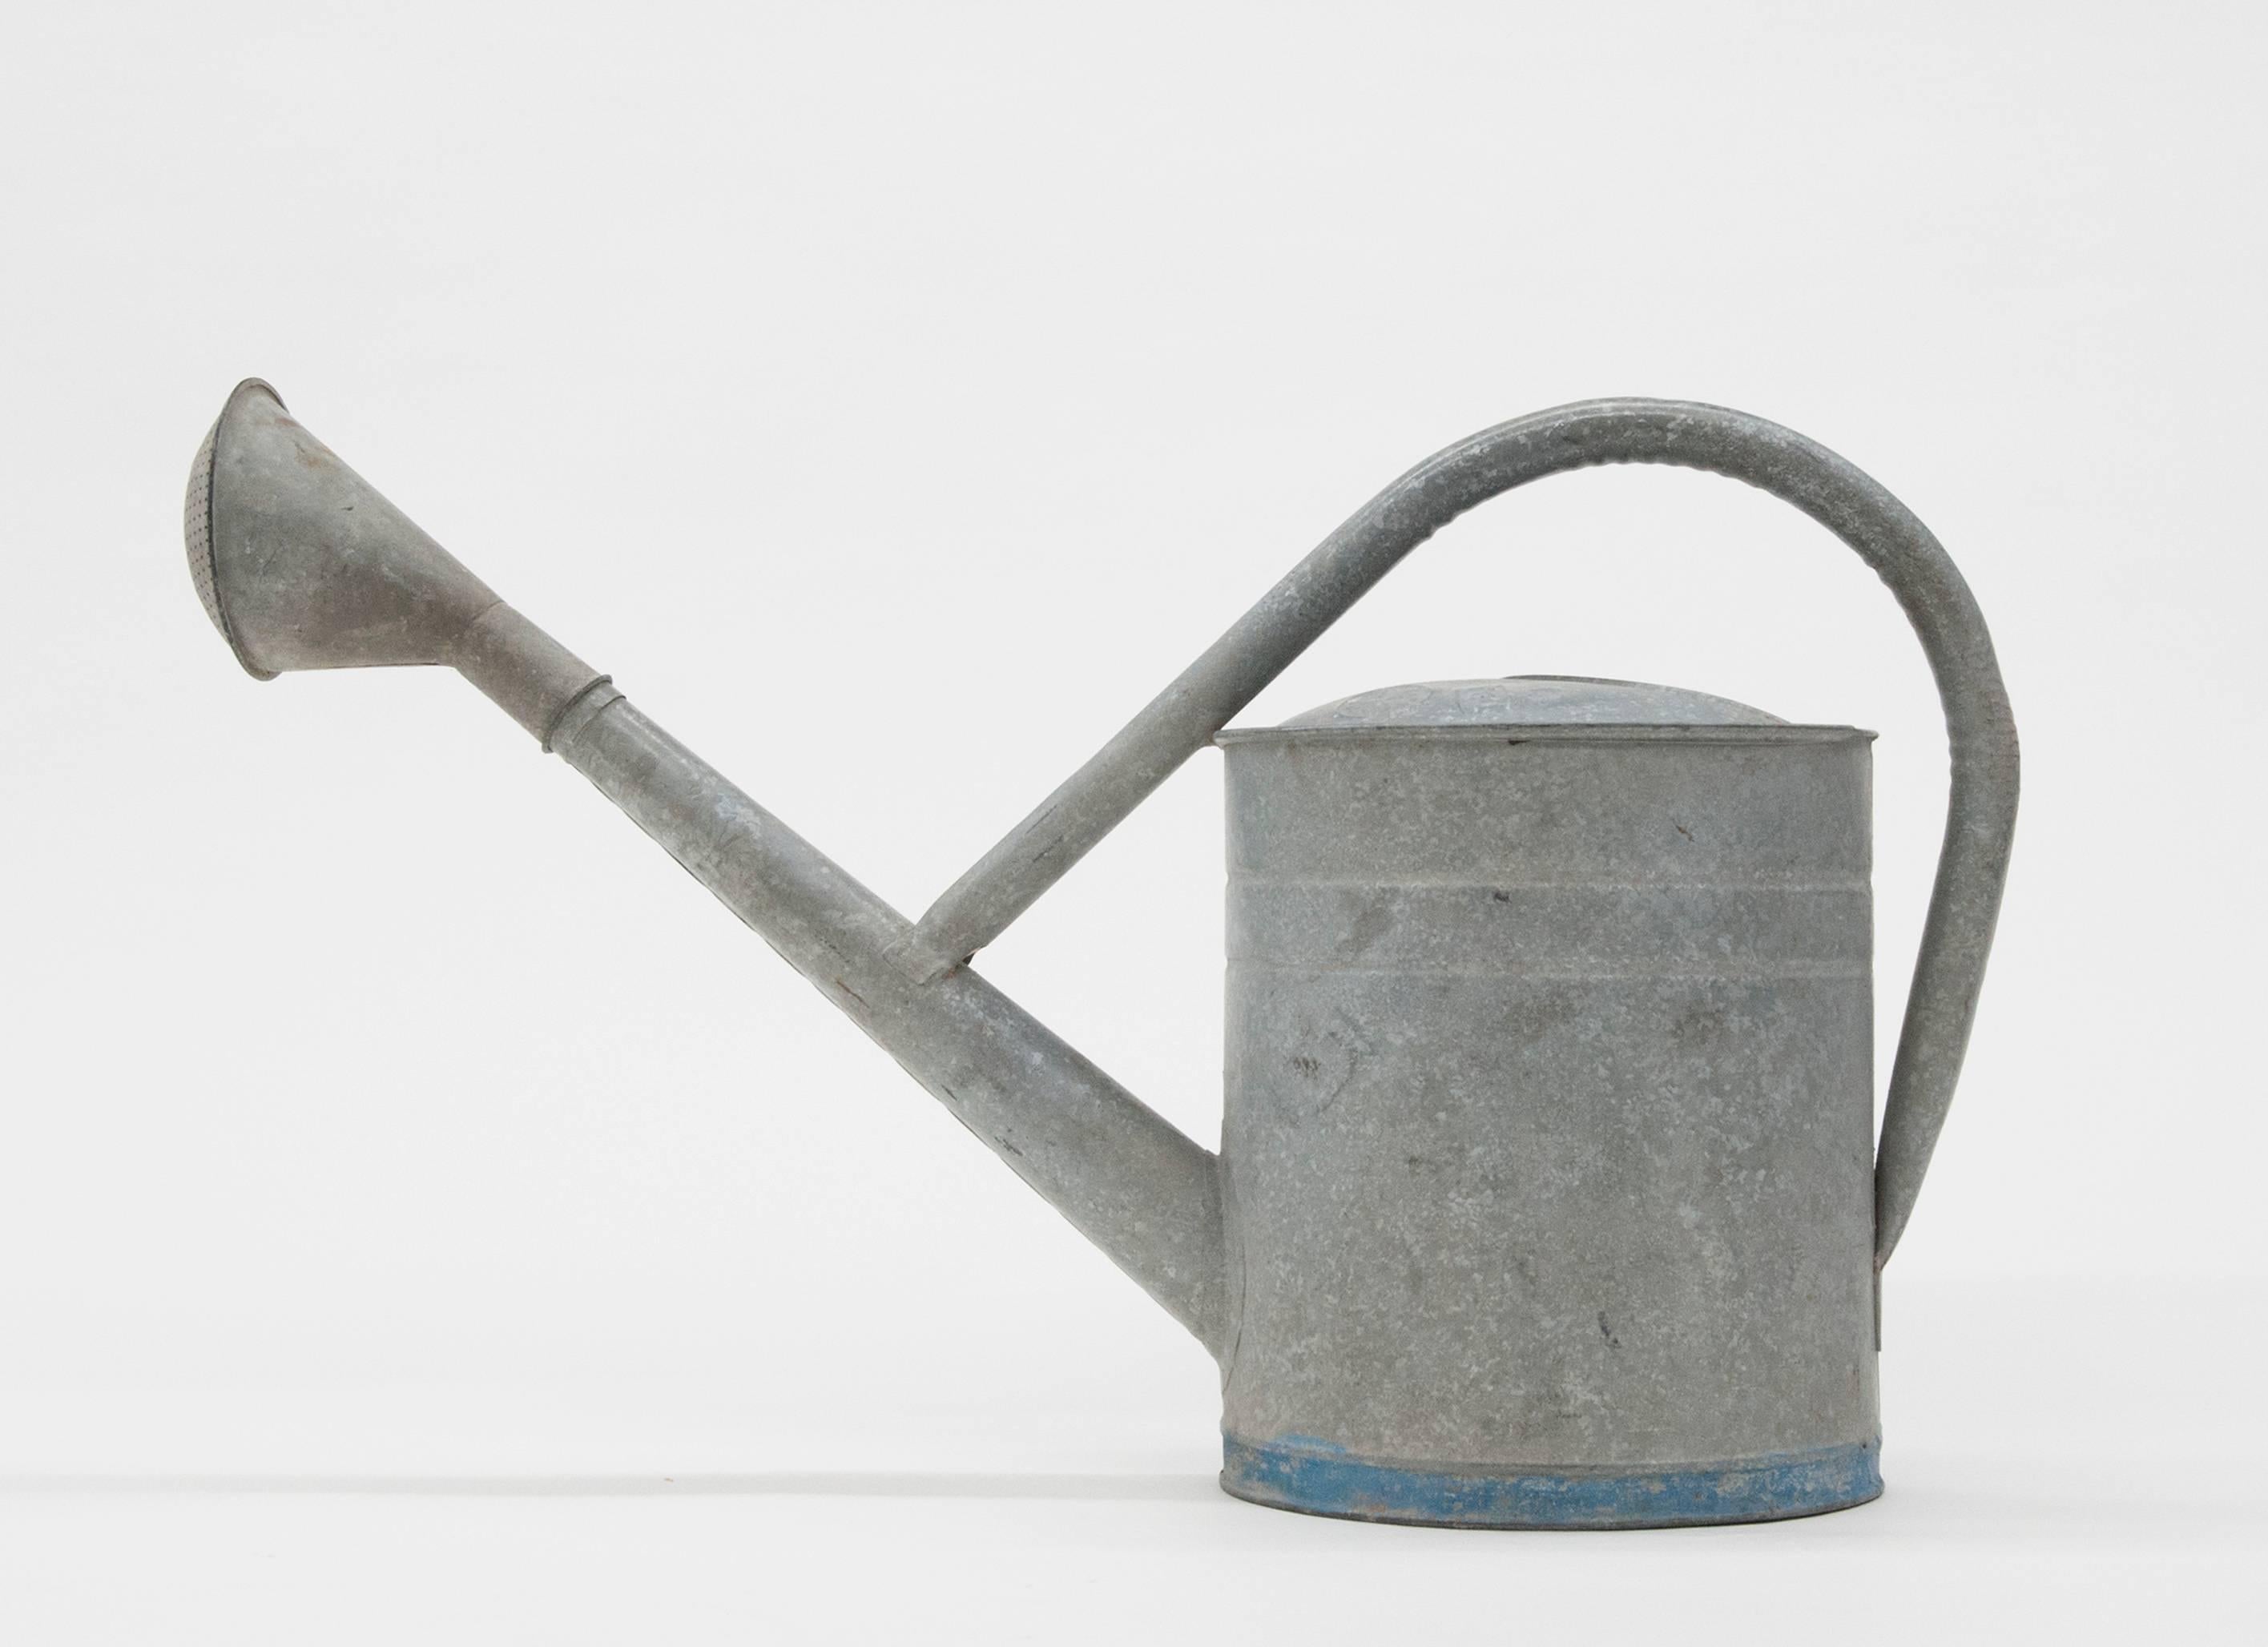 Large old galvanized watering can from Germany. Condition is excellent, works perfectly. Measures: 28